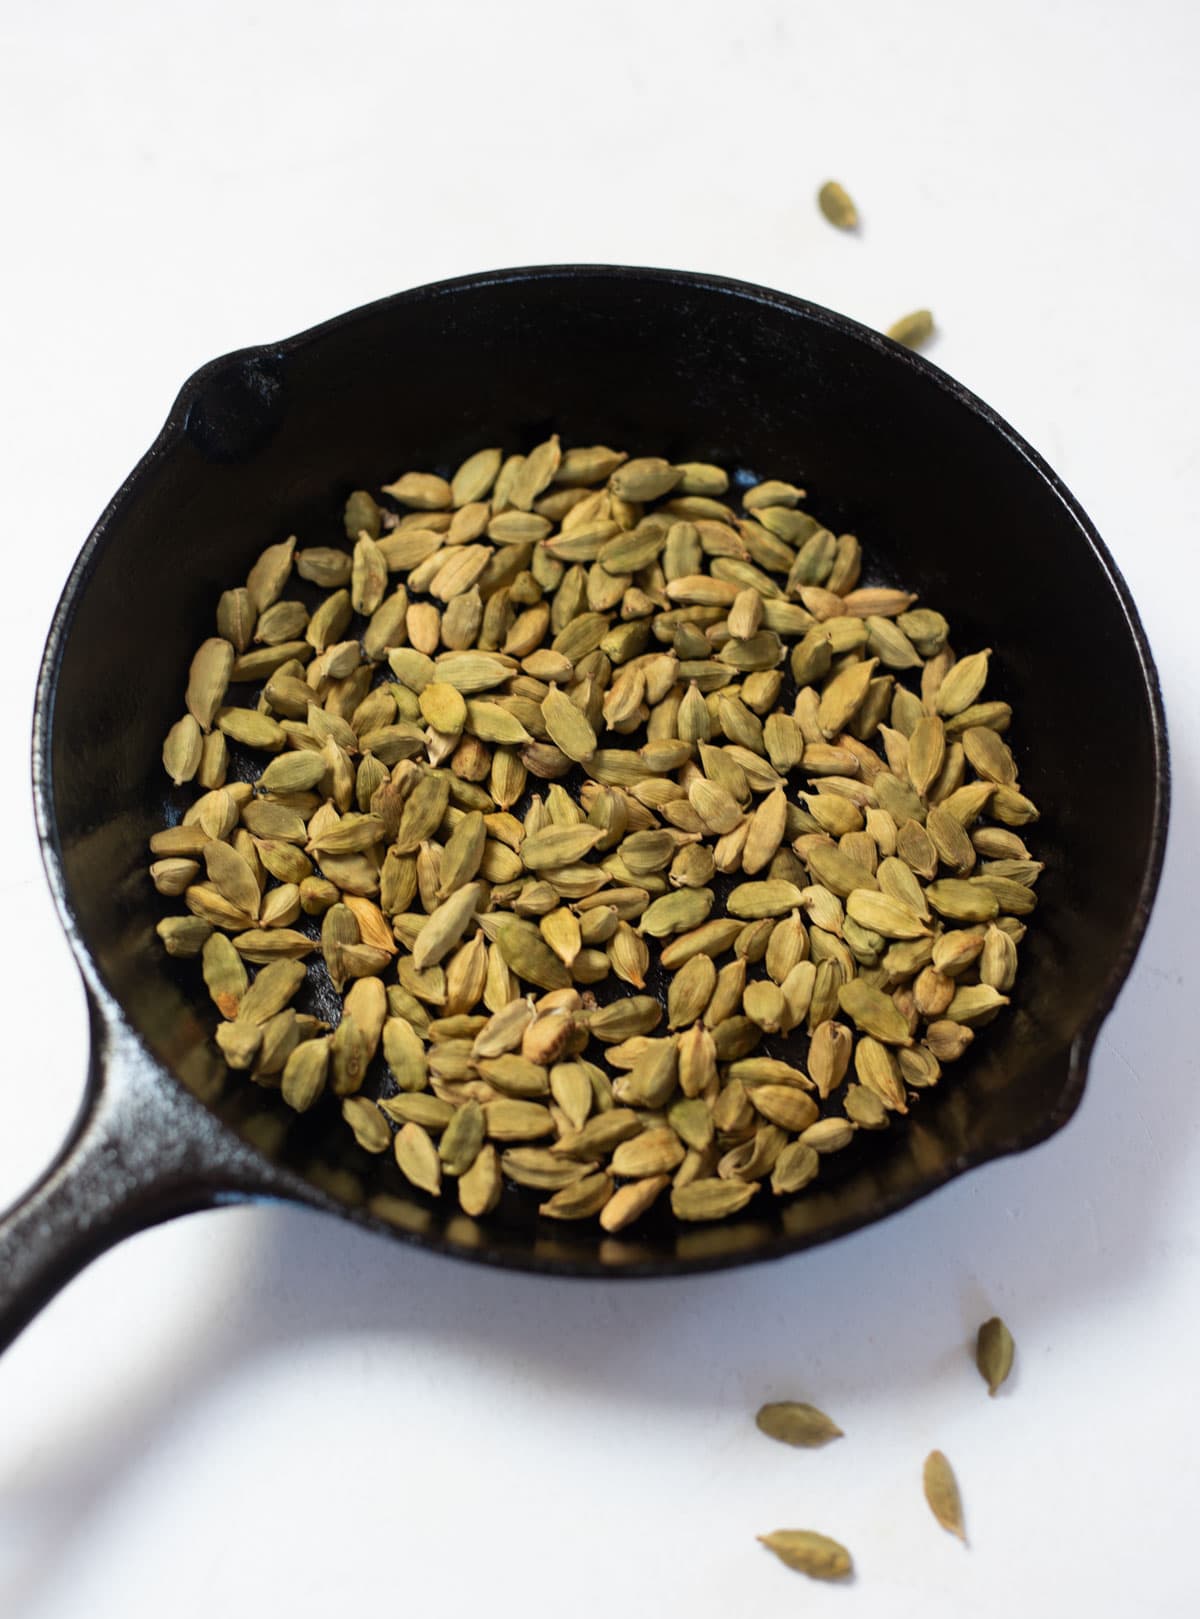 cardamom seeds in a iron skillet